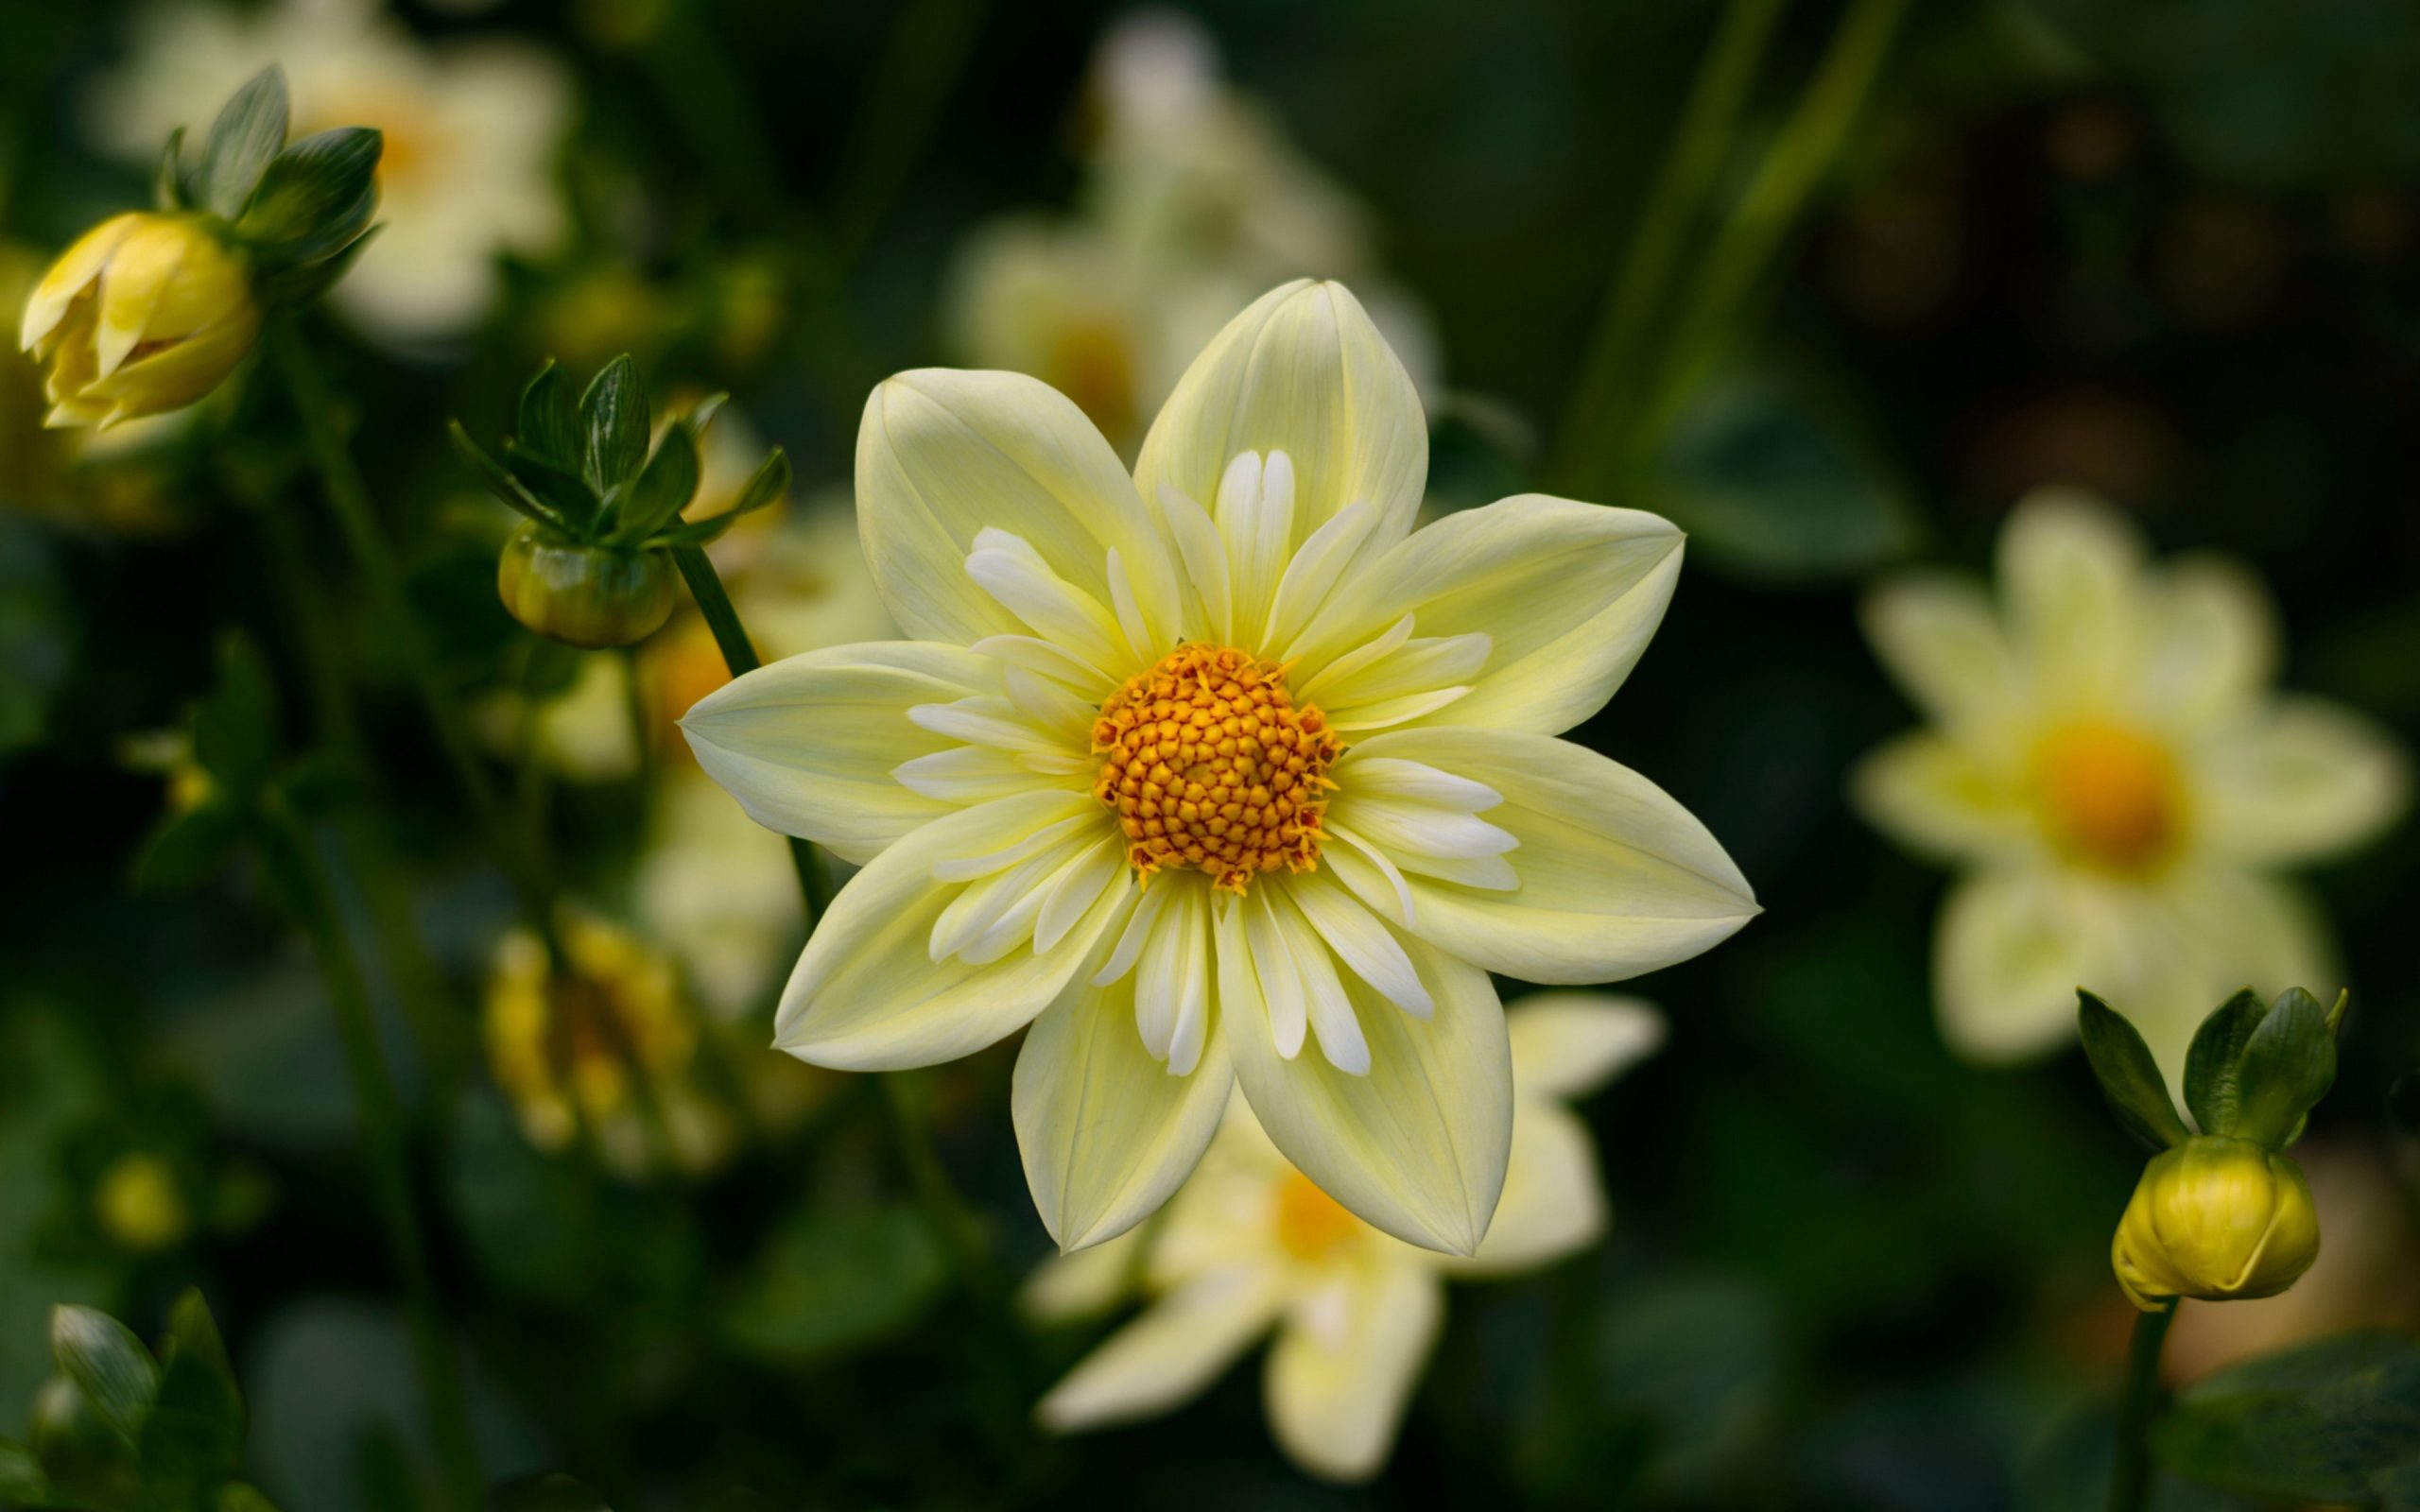 Dahlia Yellow Flowers High Quality Flower Wallpaper For Desktop Computers Hd Wallpapers For 4k Ultra Hd Tv 3840×2400